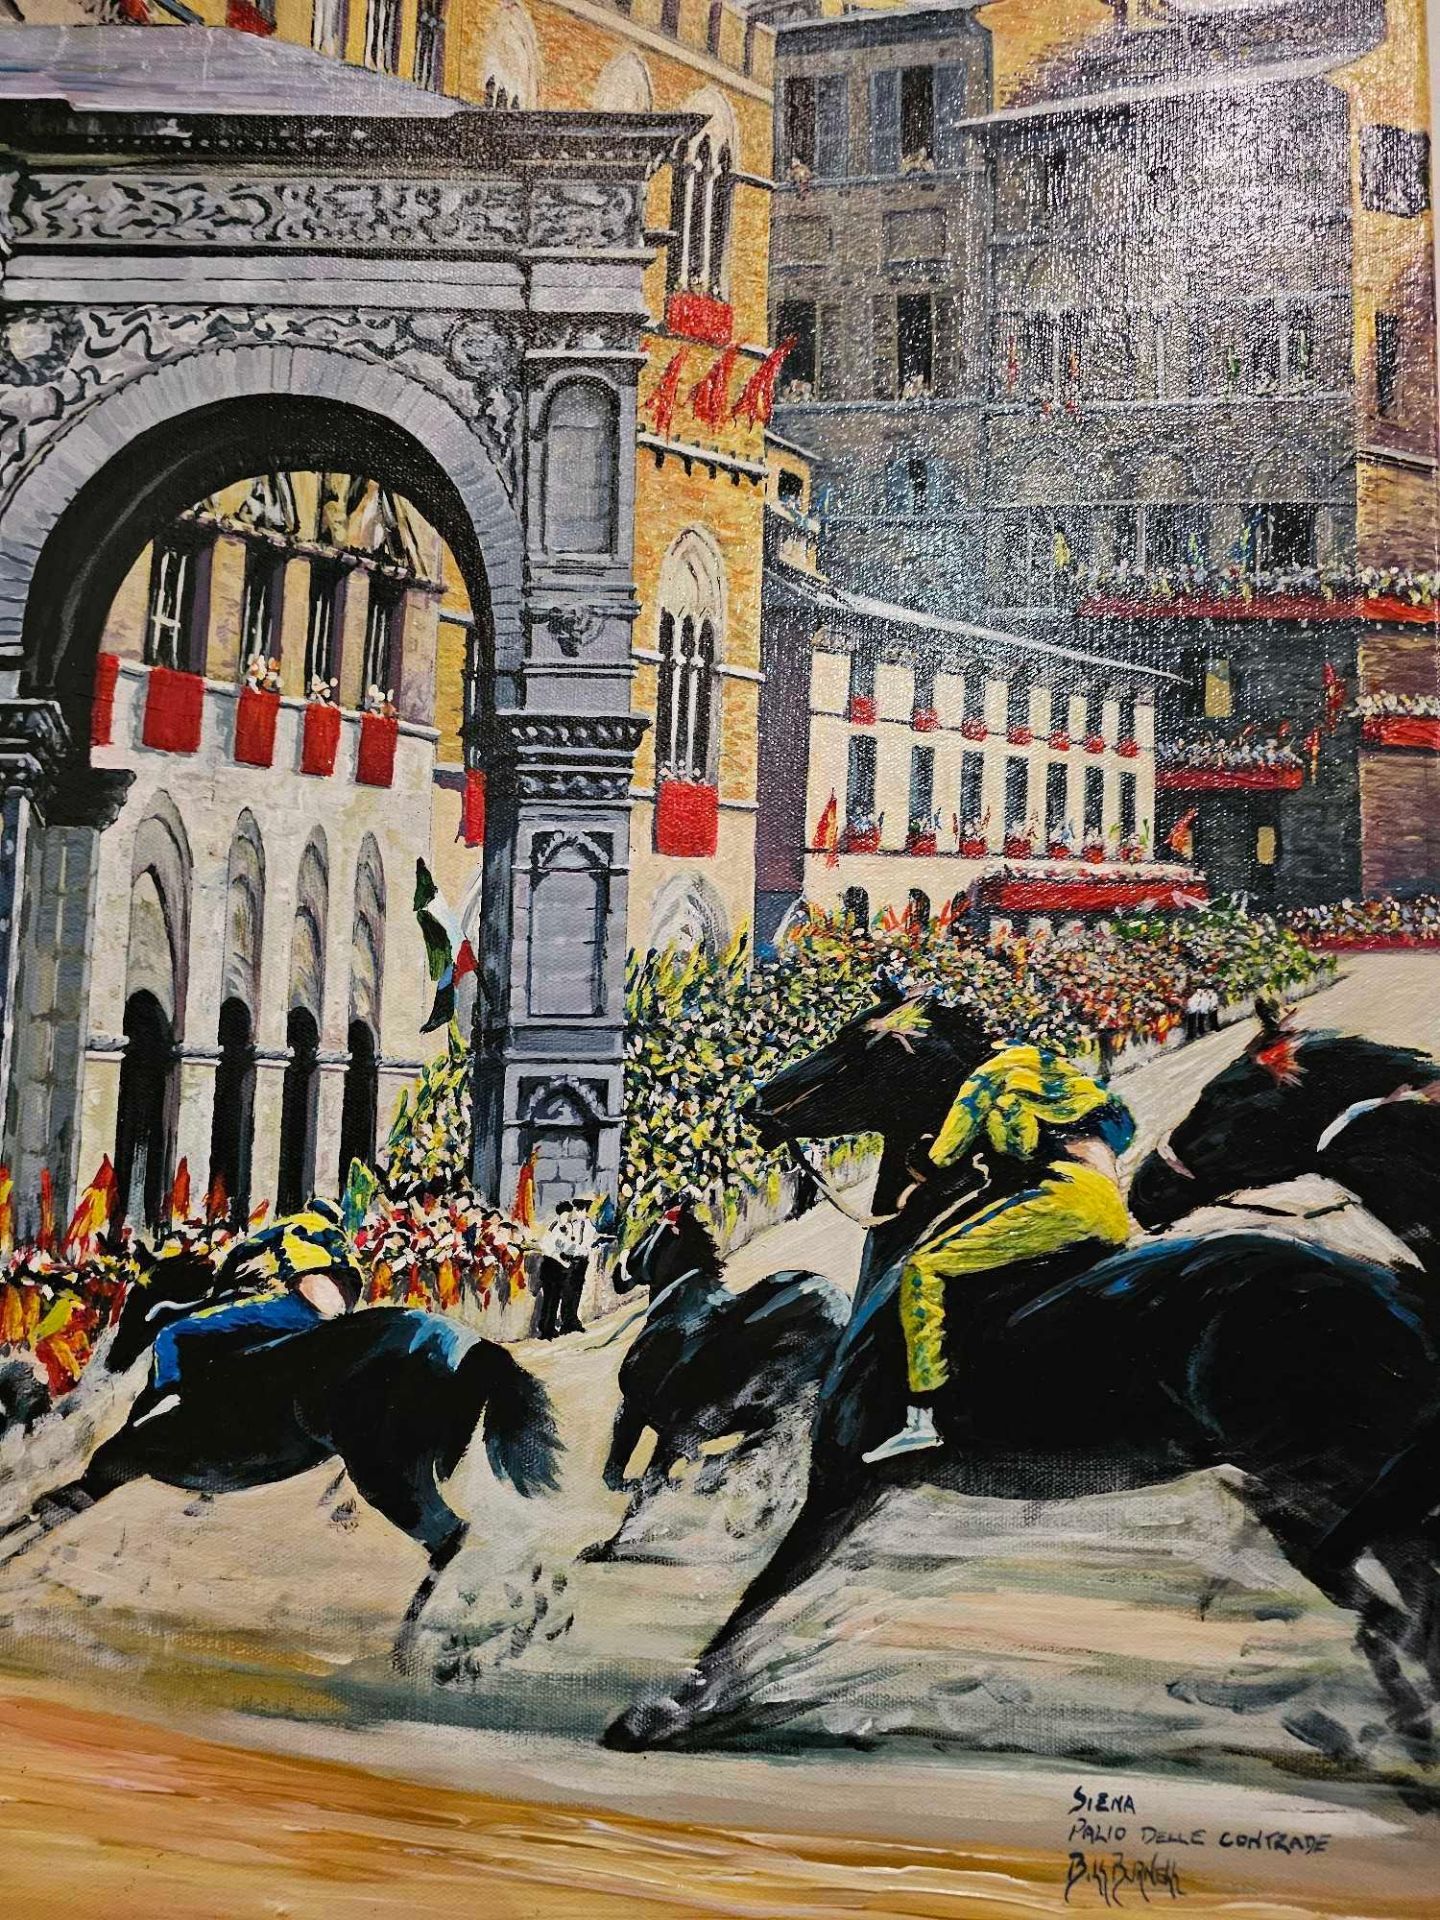 Oil On Canvas Titled Siena Palio Delle Contrade Signed Bill Burnell 46 x 61cm - Image 3 of 3